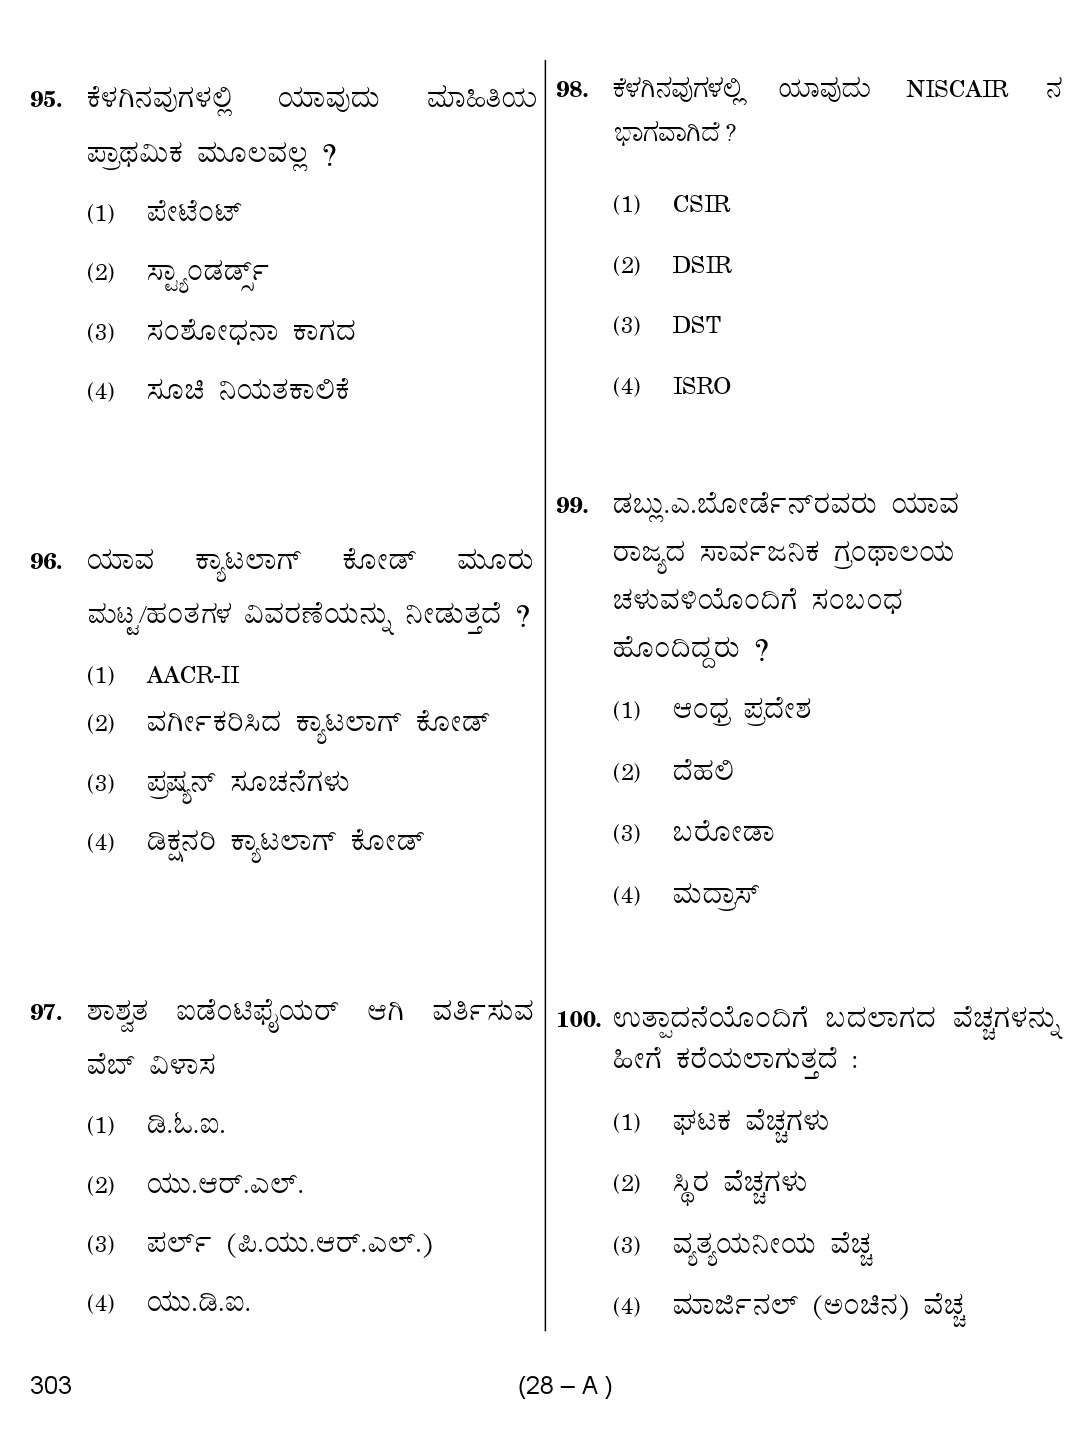 Karnataka PSC 303 Specific Paper II Librarian Exam Sample Question Paper 28